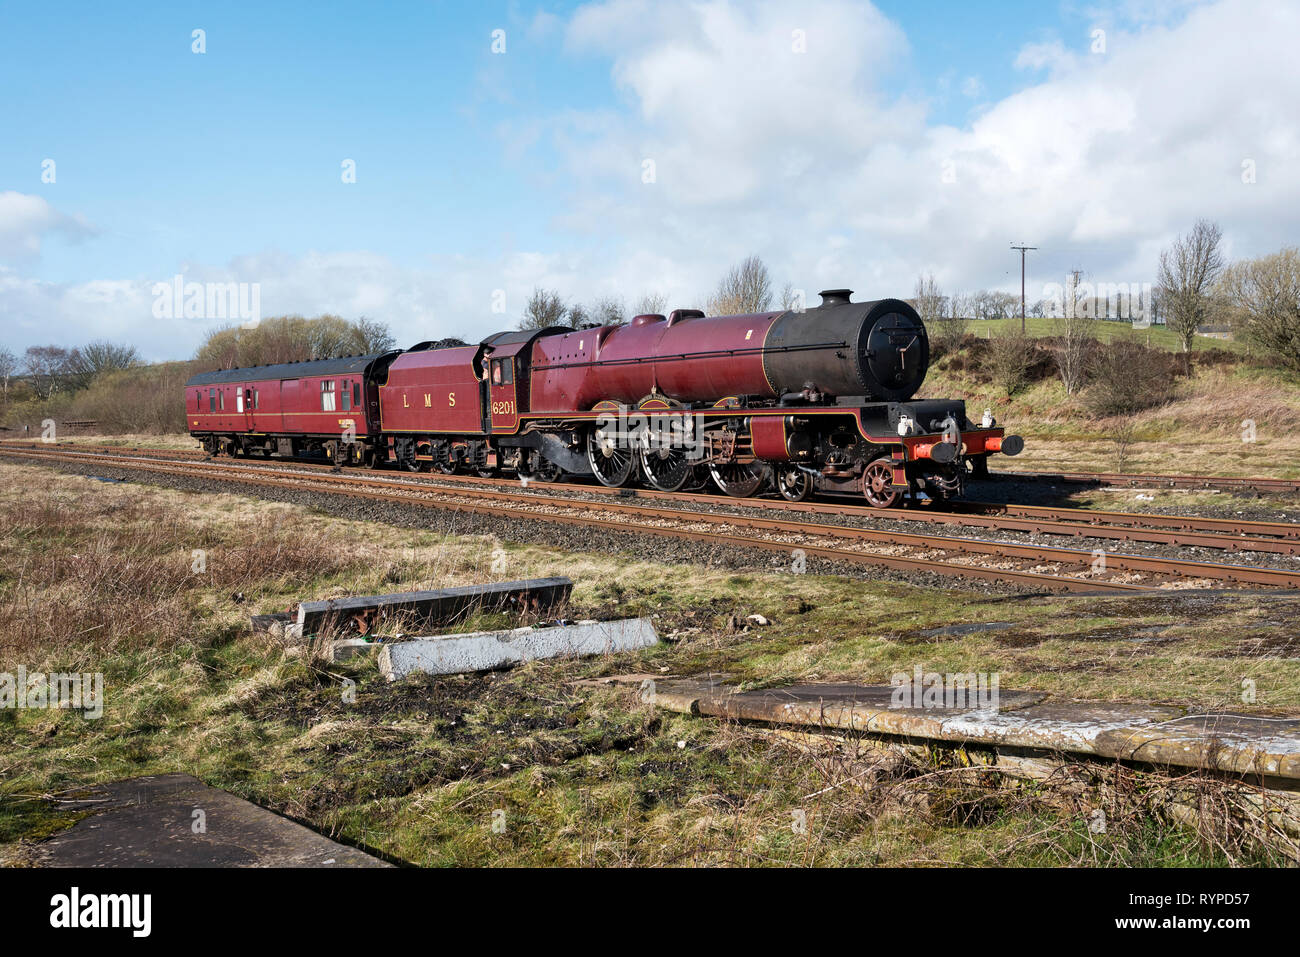 Hellifield, North Yorkshire, UK. 14th Mar 2019. Steam locomotive 6201 'Princess Elizabeth' arrives at Hellifield Station; North Yorkshire; on a mainline test run from it's base at Carnforth; Lancashire. The locomotive was built in 1933 and was named after the then Princess Elizabeth; the current Queen Elizabeth II. The locomotive has recently been restored for mainline railway service. Credit: John Bentley/Alamy Live News Stock Photo